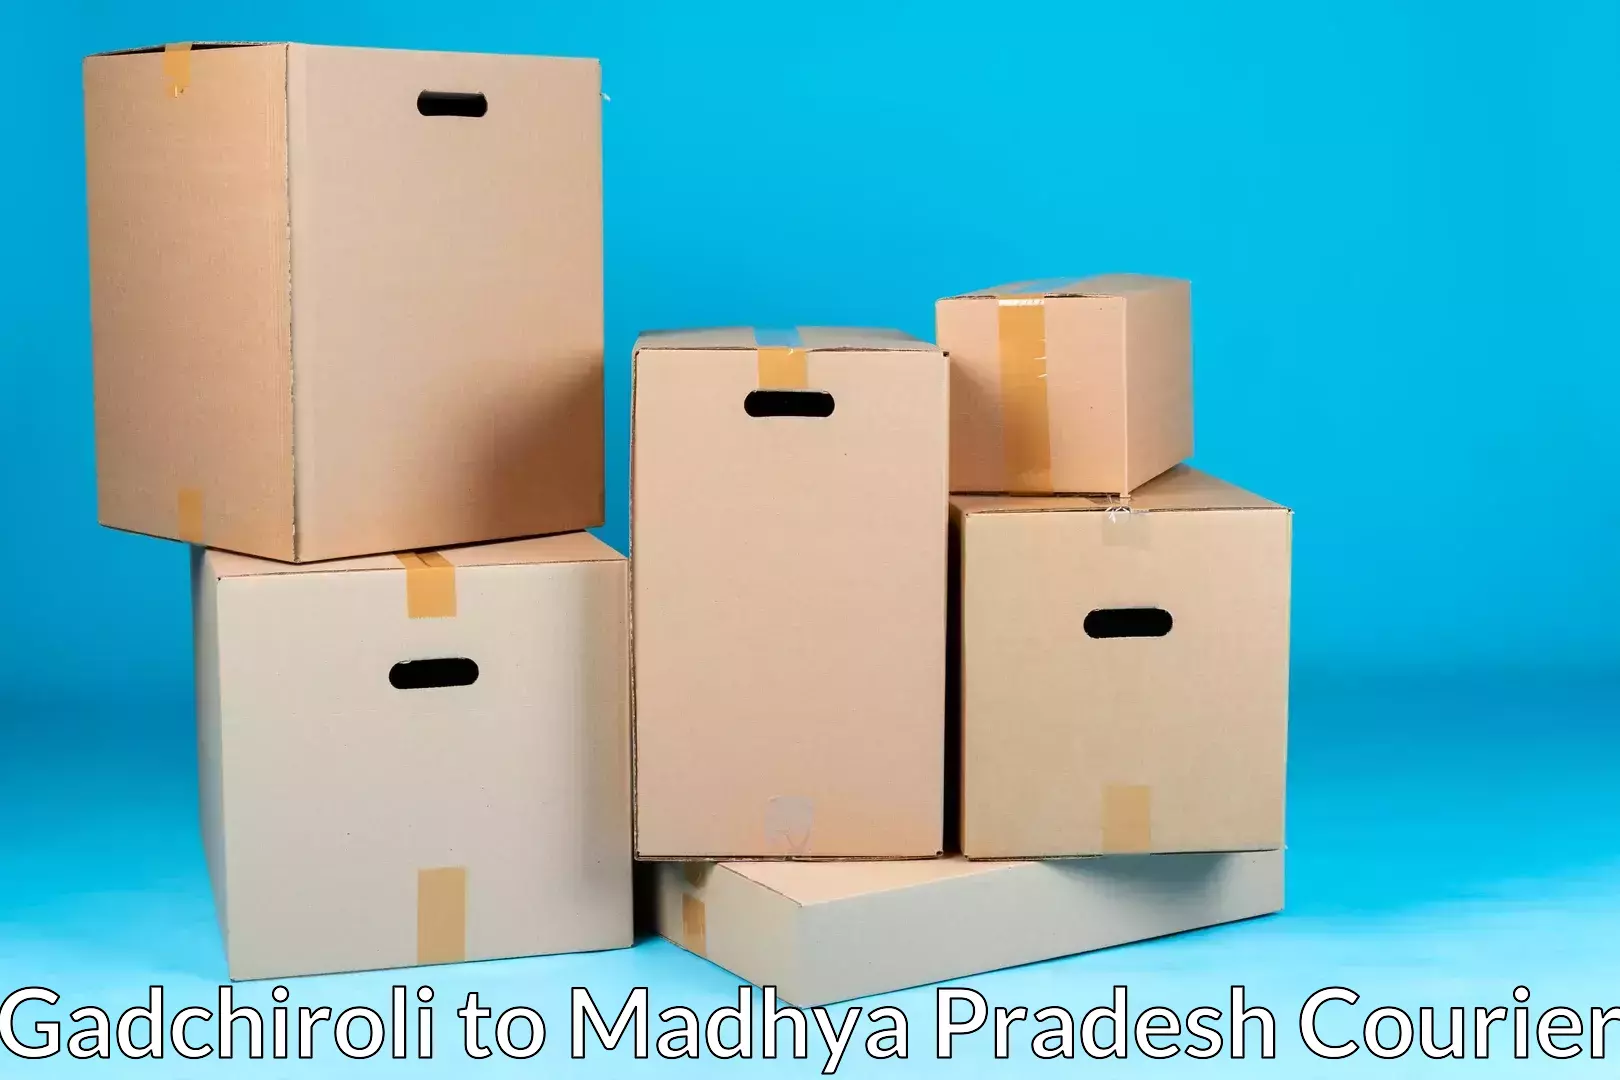 Professional packing services Gadchiroli to Pachore